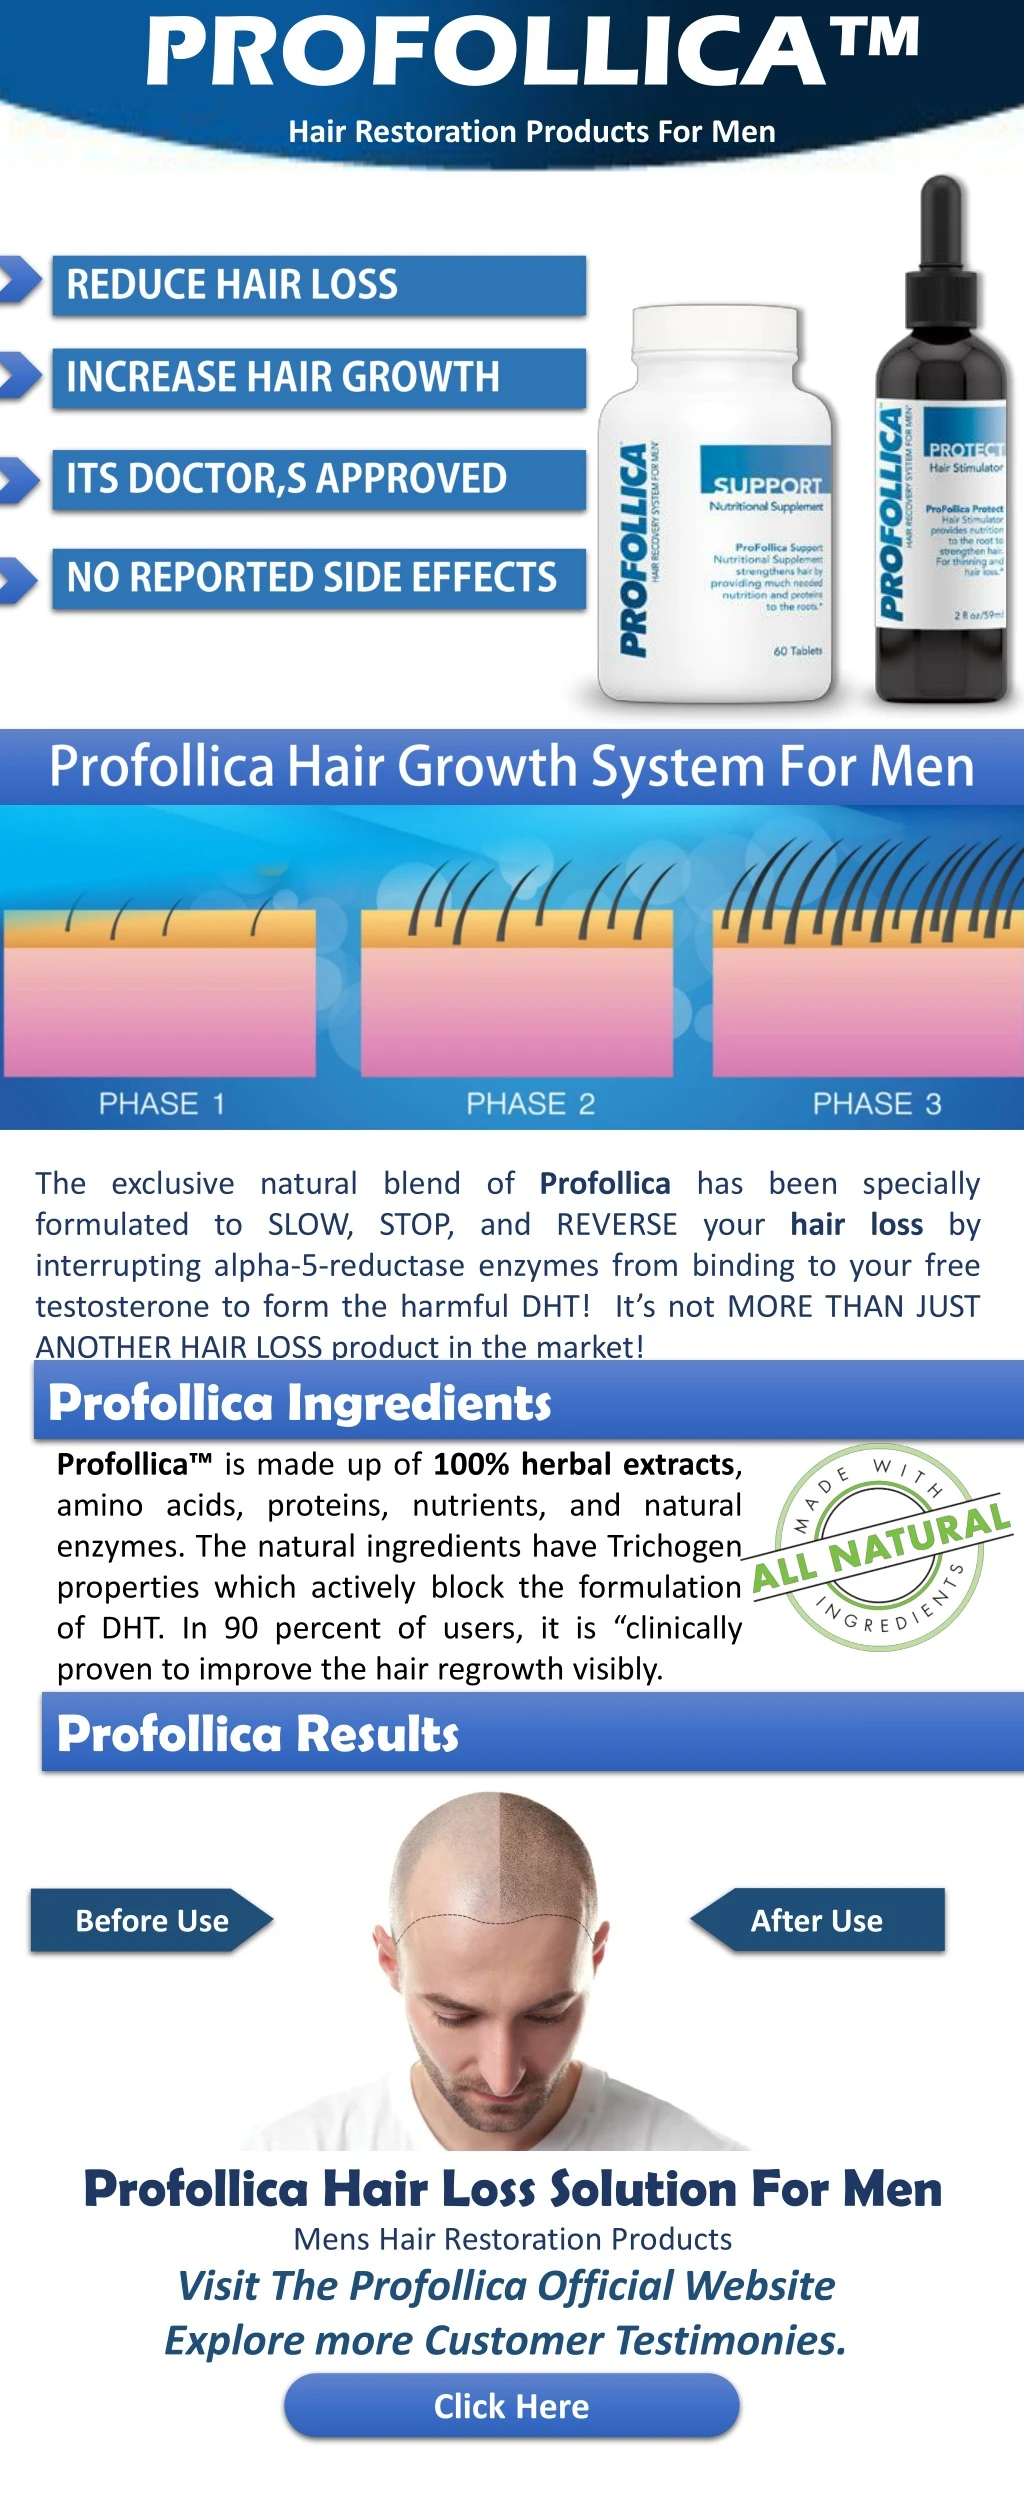 profollica hair restoration products for men